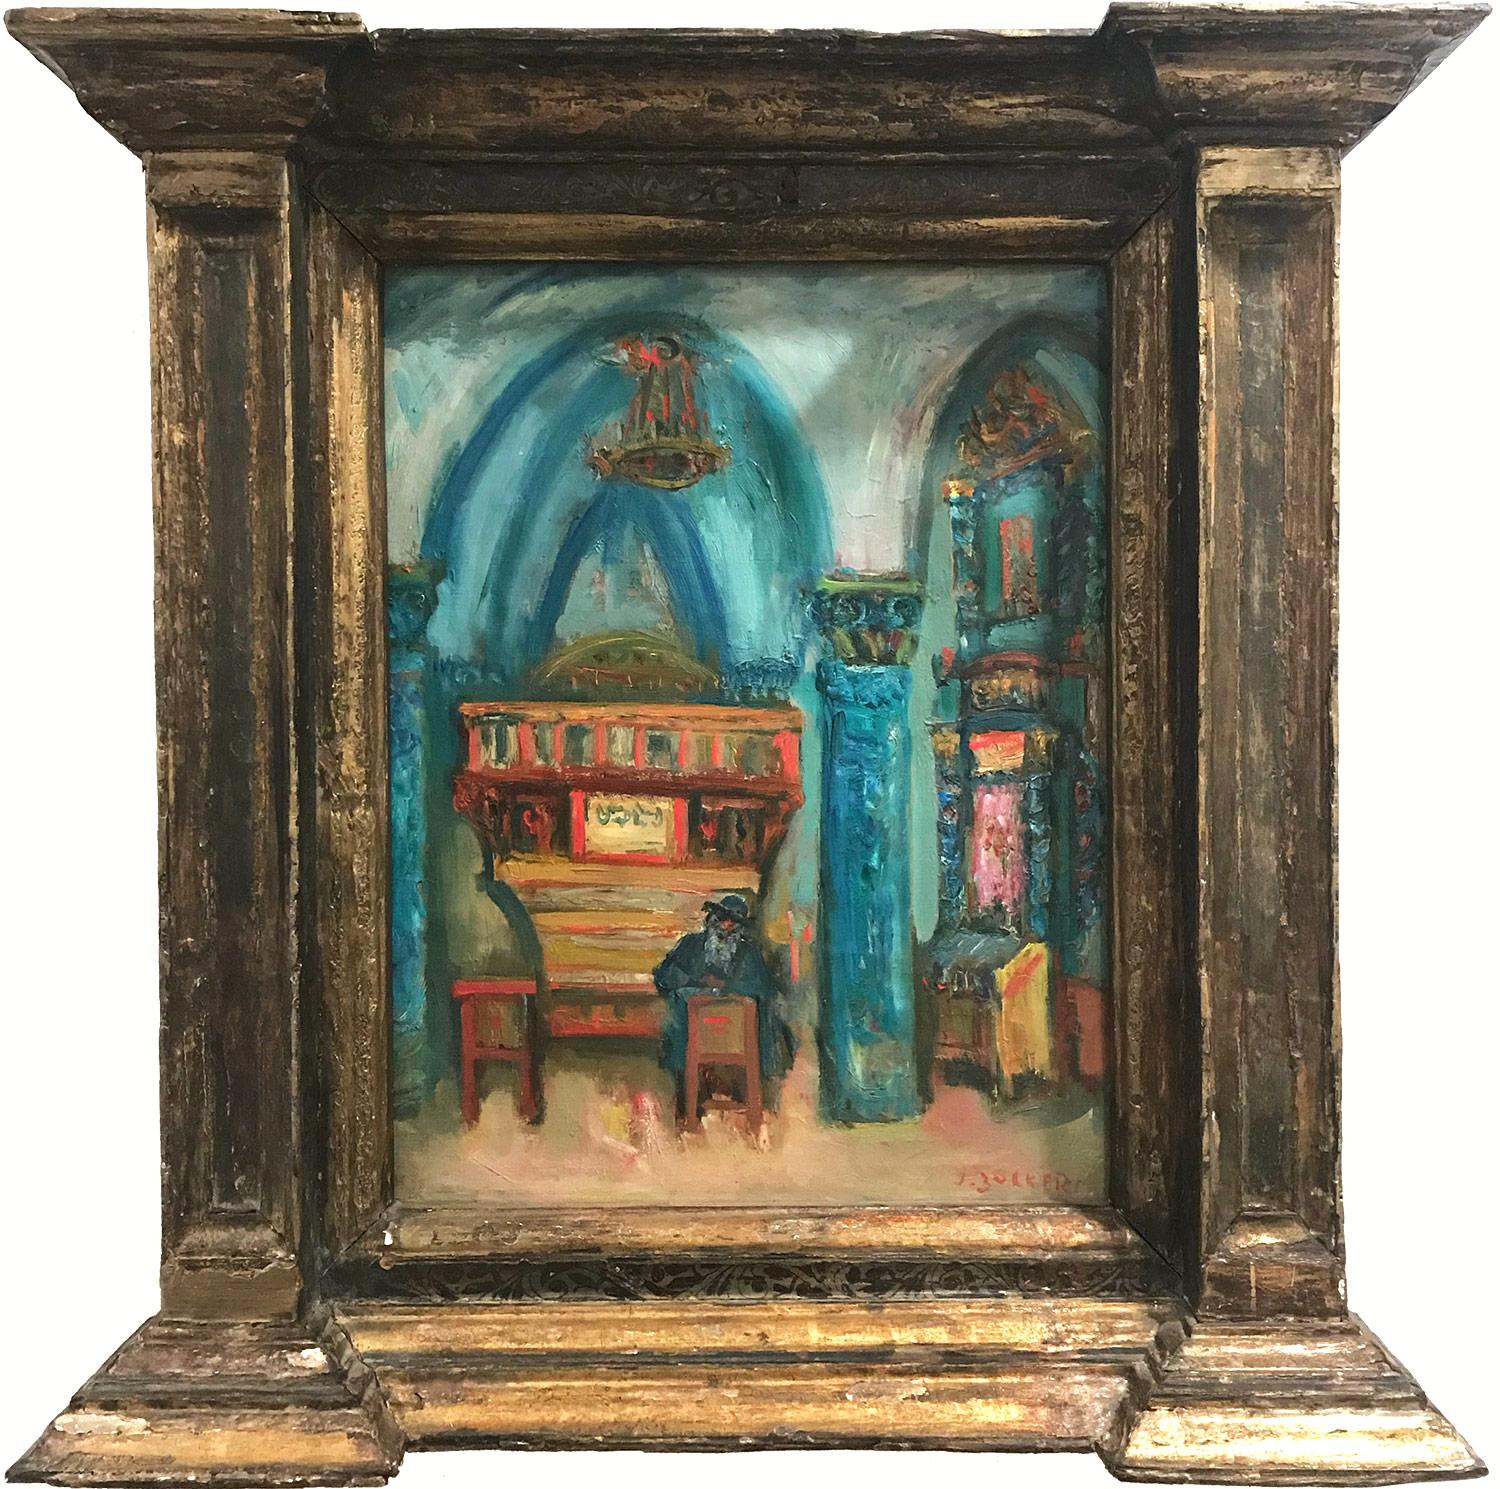 Jacques Zucker Figurative Painting - "Synagogue Interior Scene with Figure" Post-Impressionist Oil Painting on Canvas